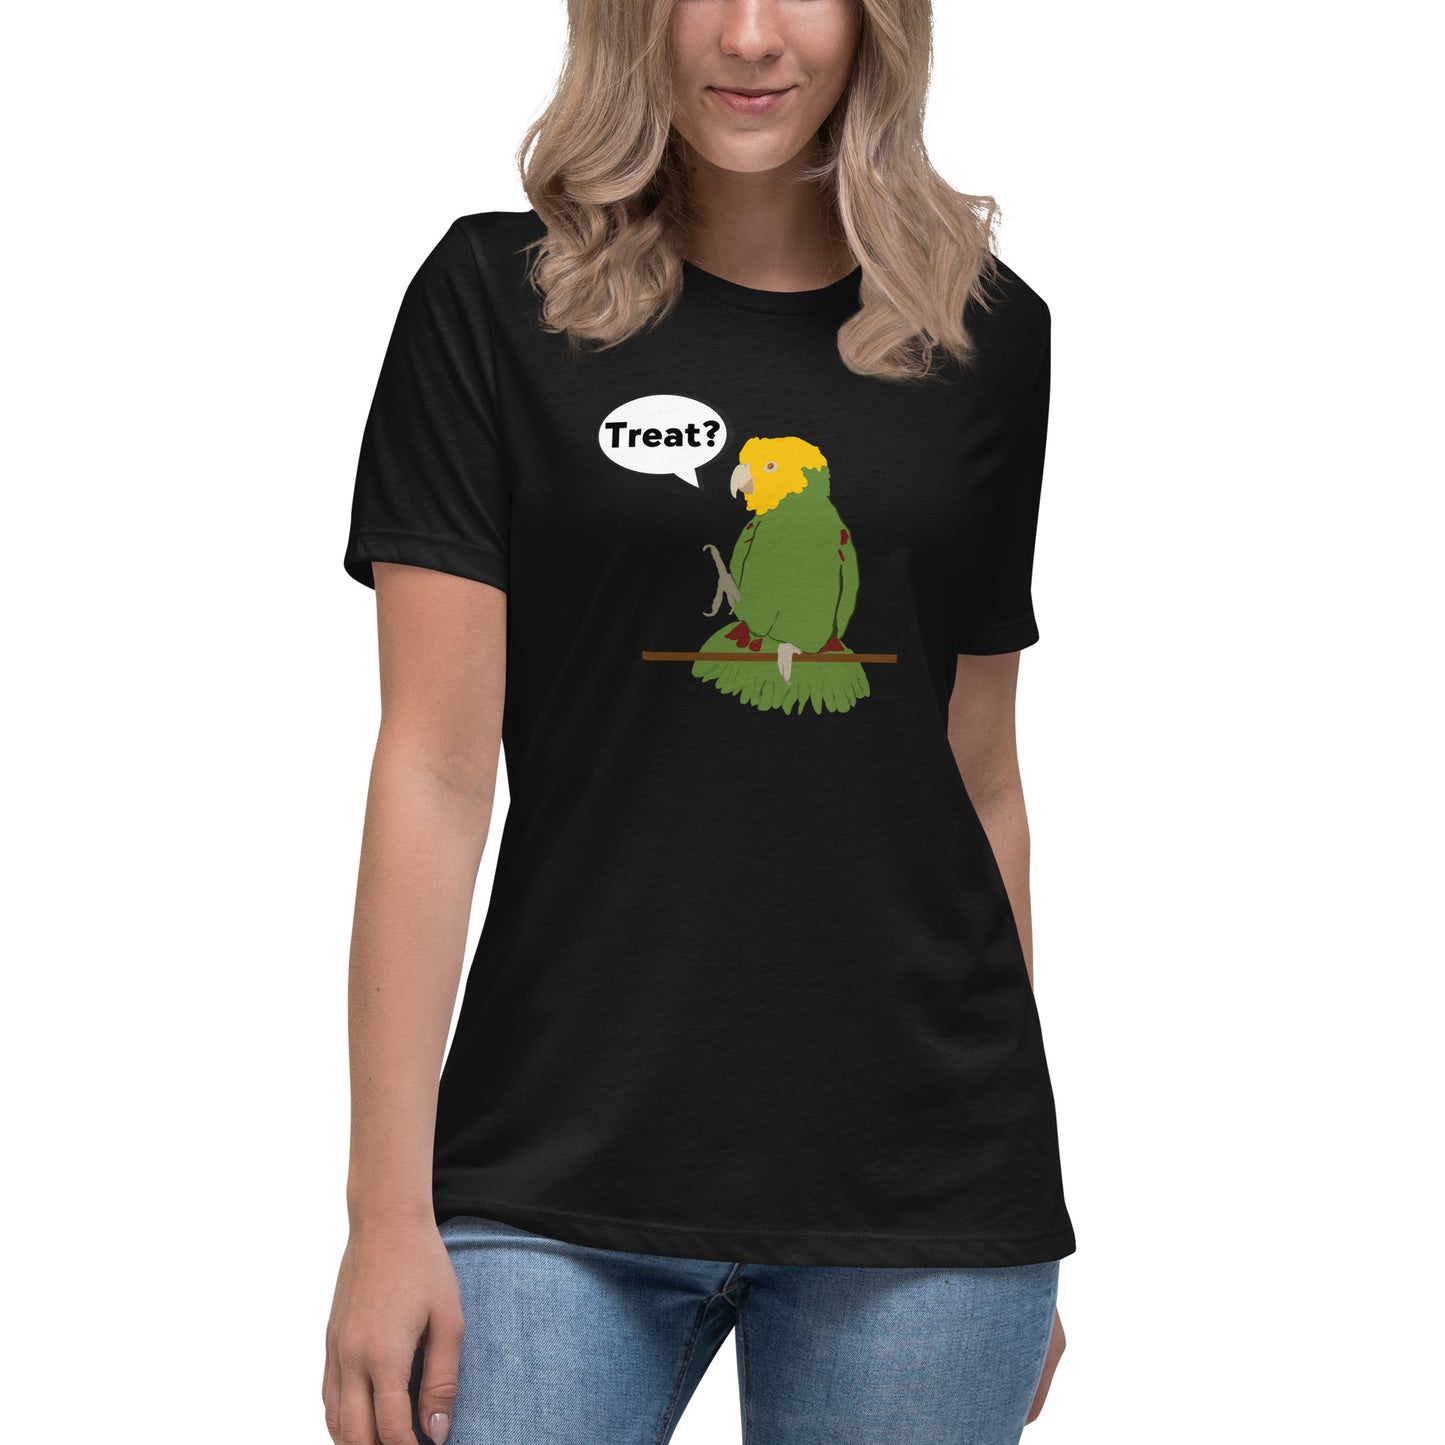 Chico Wants a Treat! Women's Relaxed T-Shirt